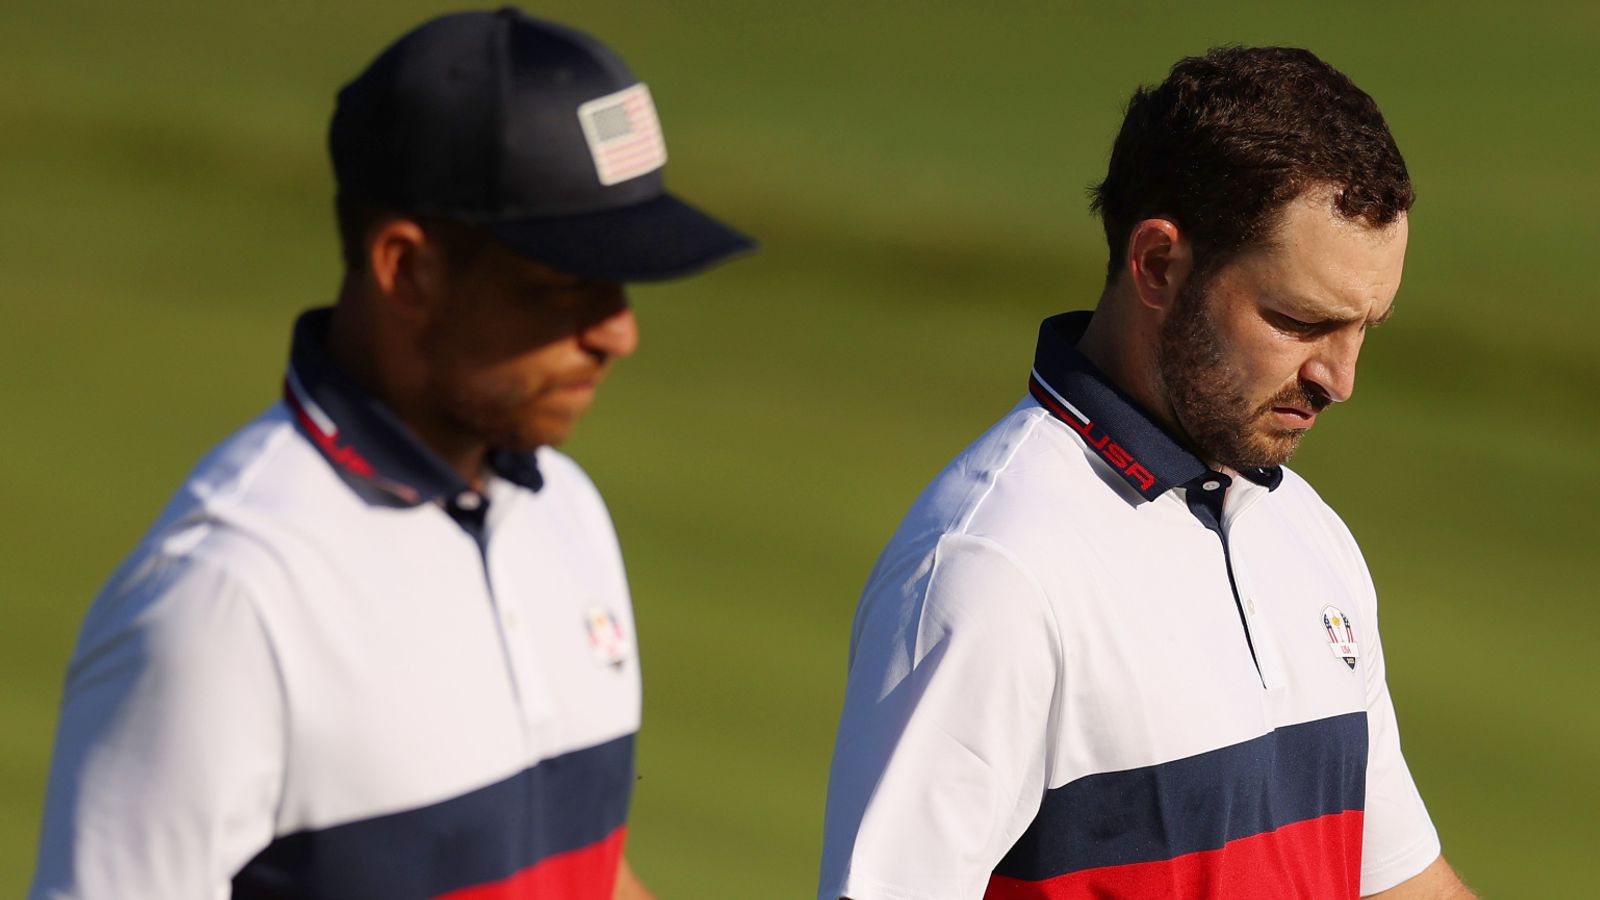 Ryder Cup: Team USA fractured as Patrick Cantlay calls for players to be paid for featuring in Rome | Golf News